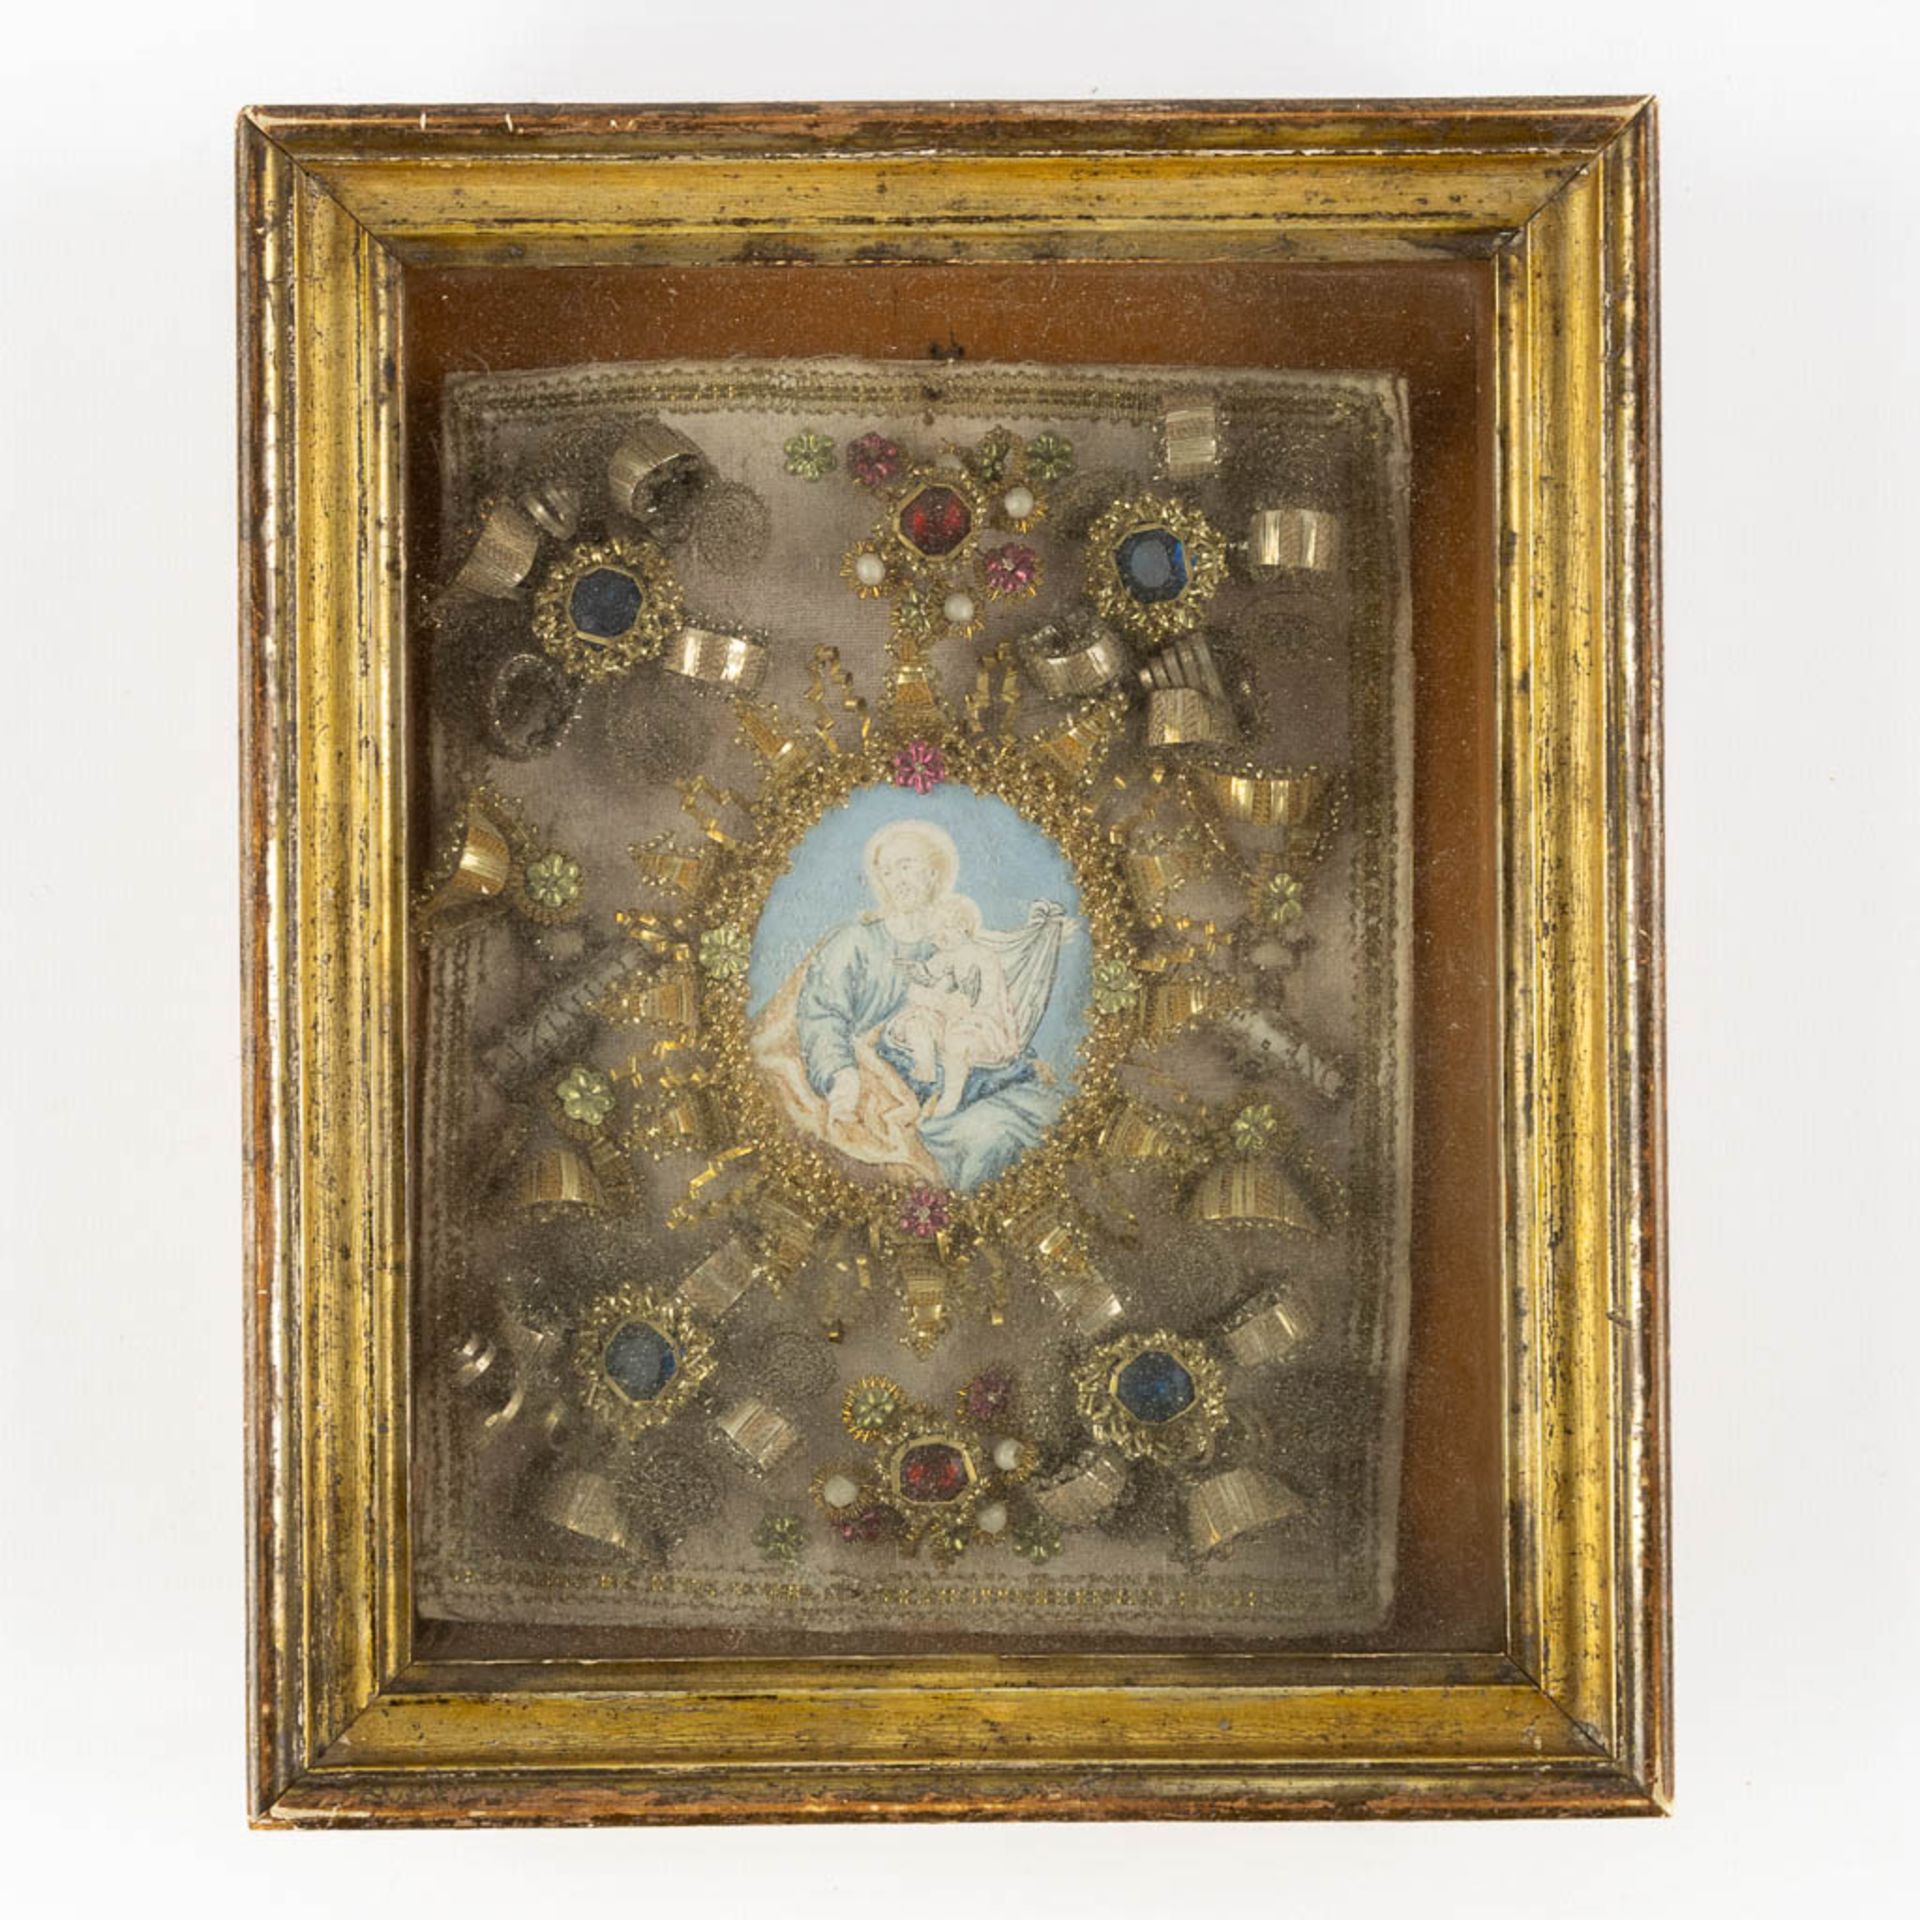 An antique frame with an image of Joseph with child, cabochons and decorations. 19th C. (W:21 x H:25